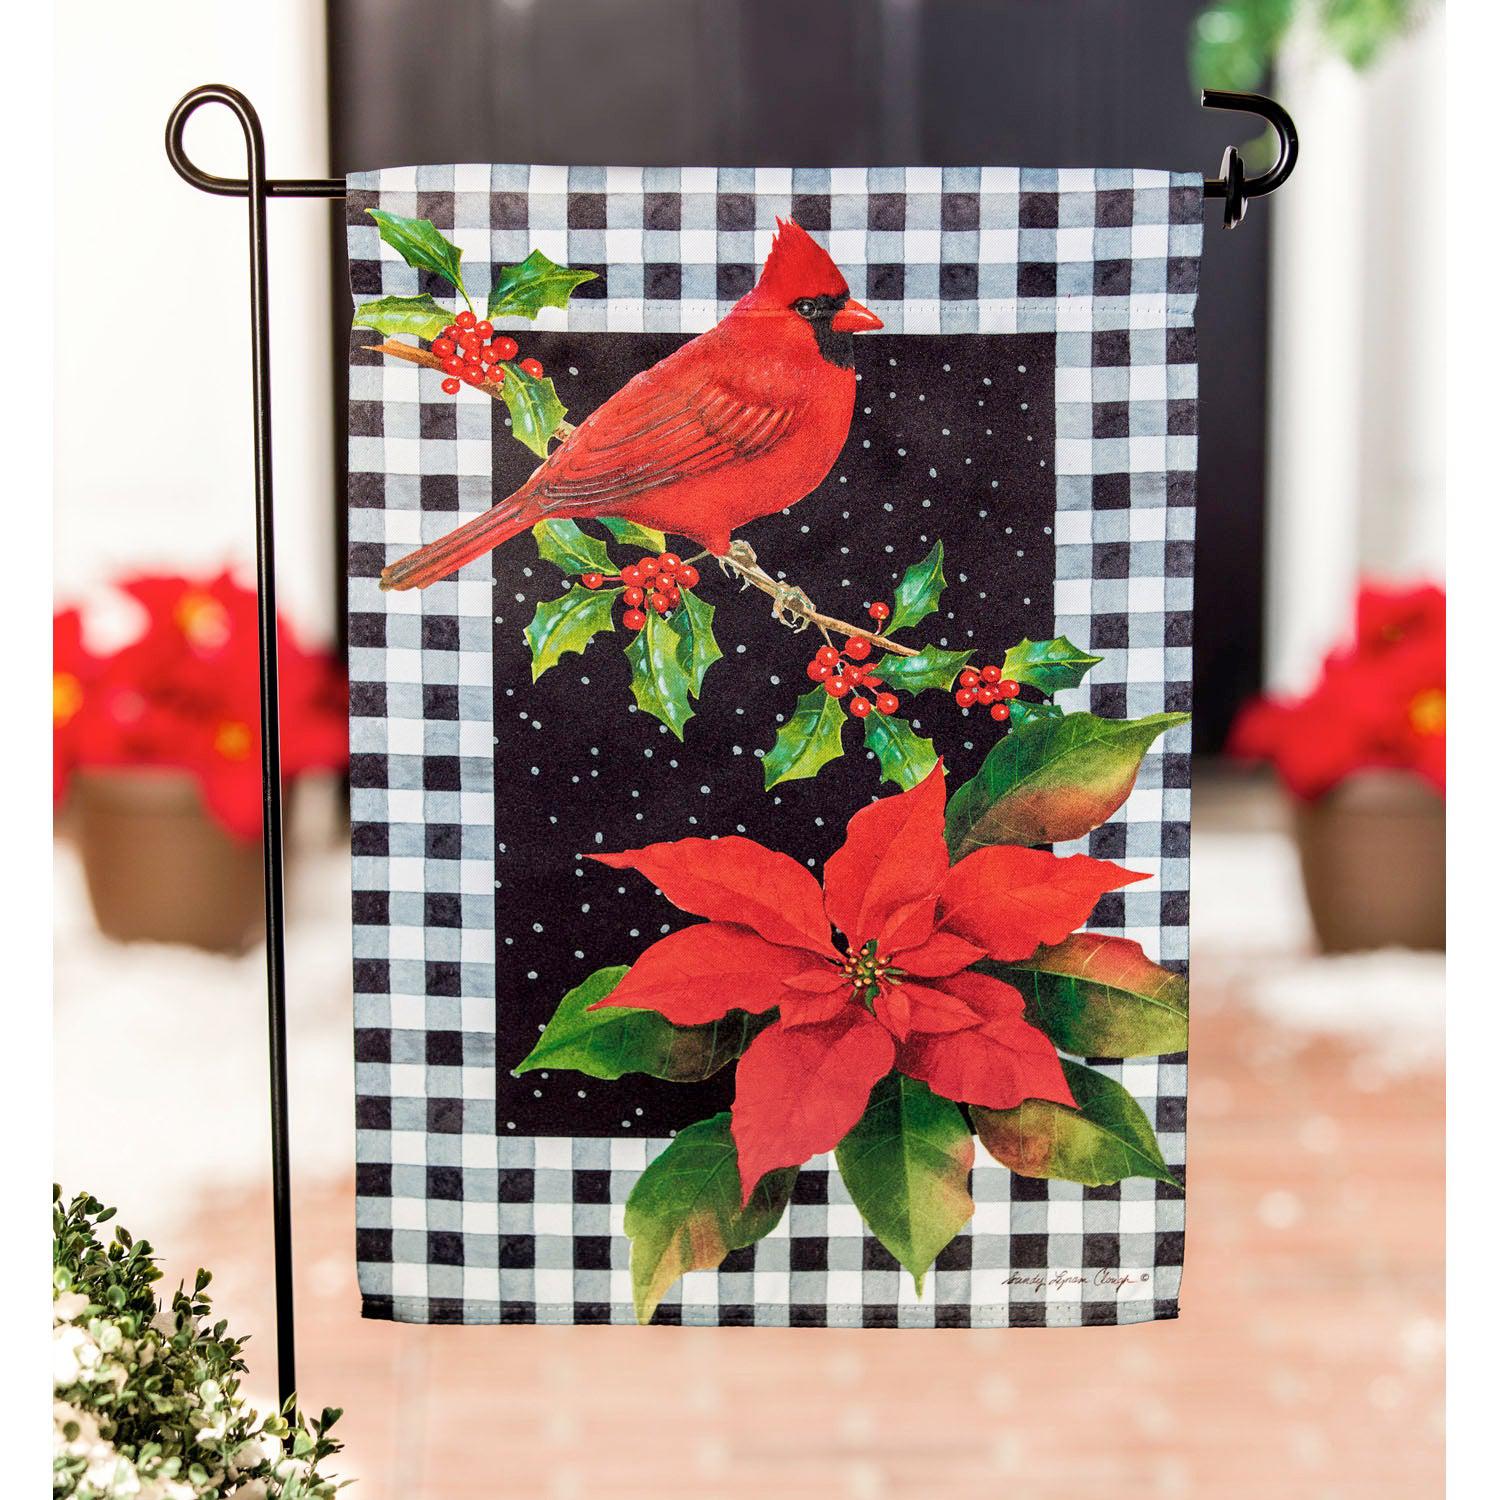 The Cardinal & Holly garden flag features a bright red cardinal sitting on a holly branch with a poinsettia in the lower corner and a black & white checked background